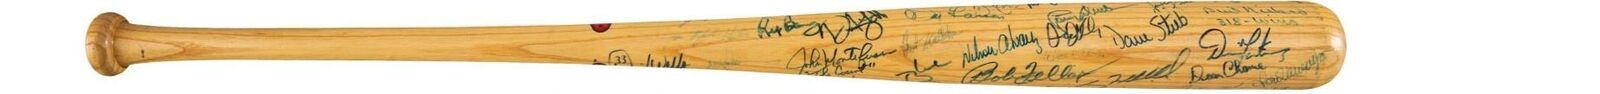 The Most Complete No Hitter Pitchers Signed Bat 49 Sigs! Tom Seaver With SGC COA